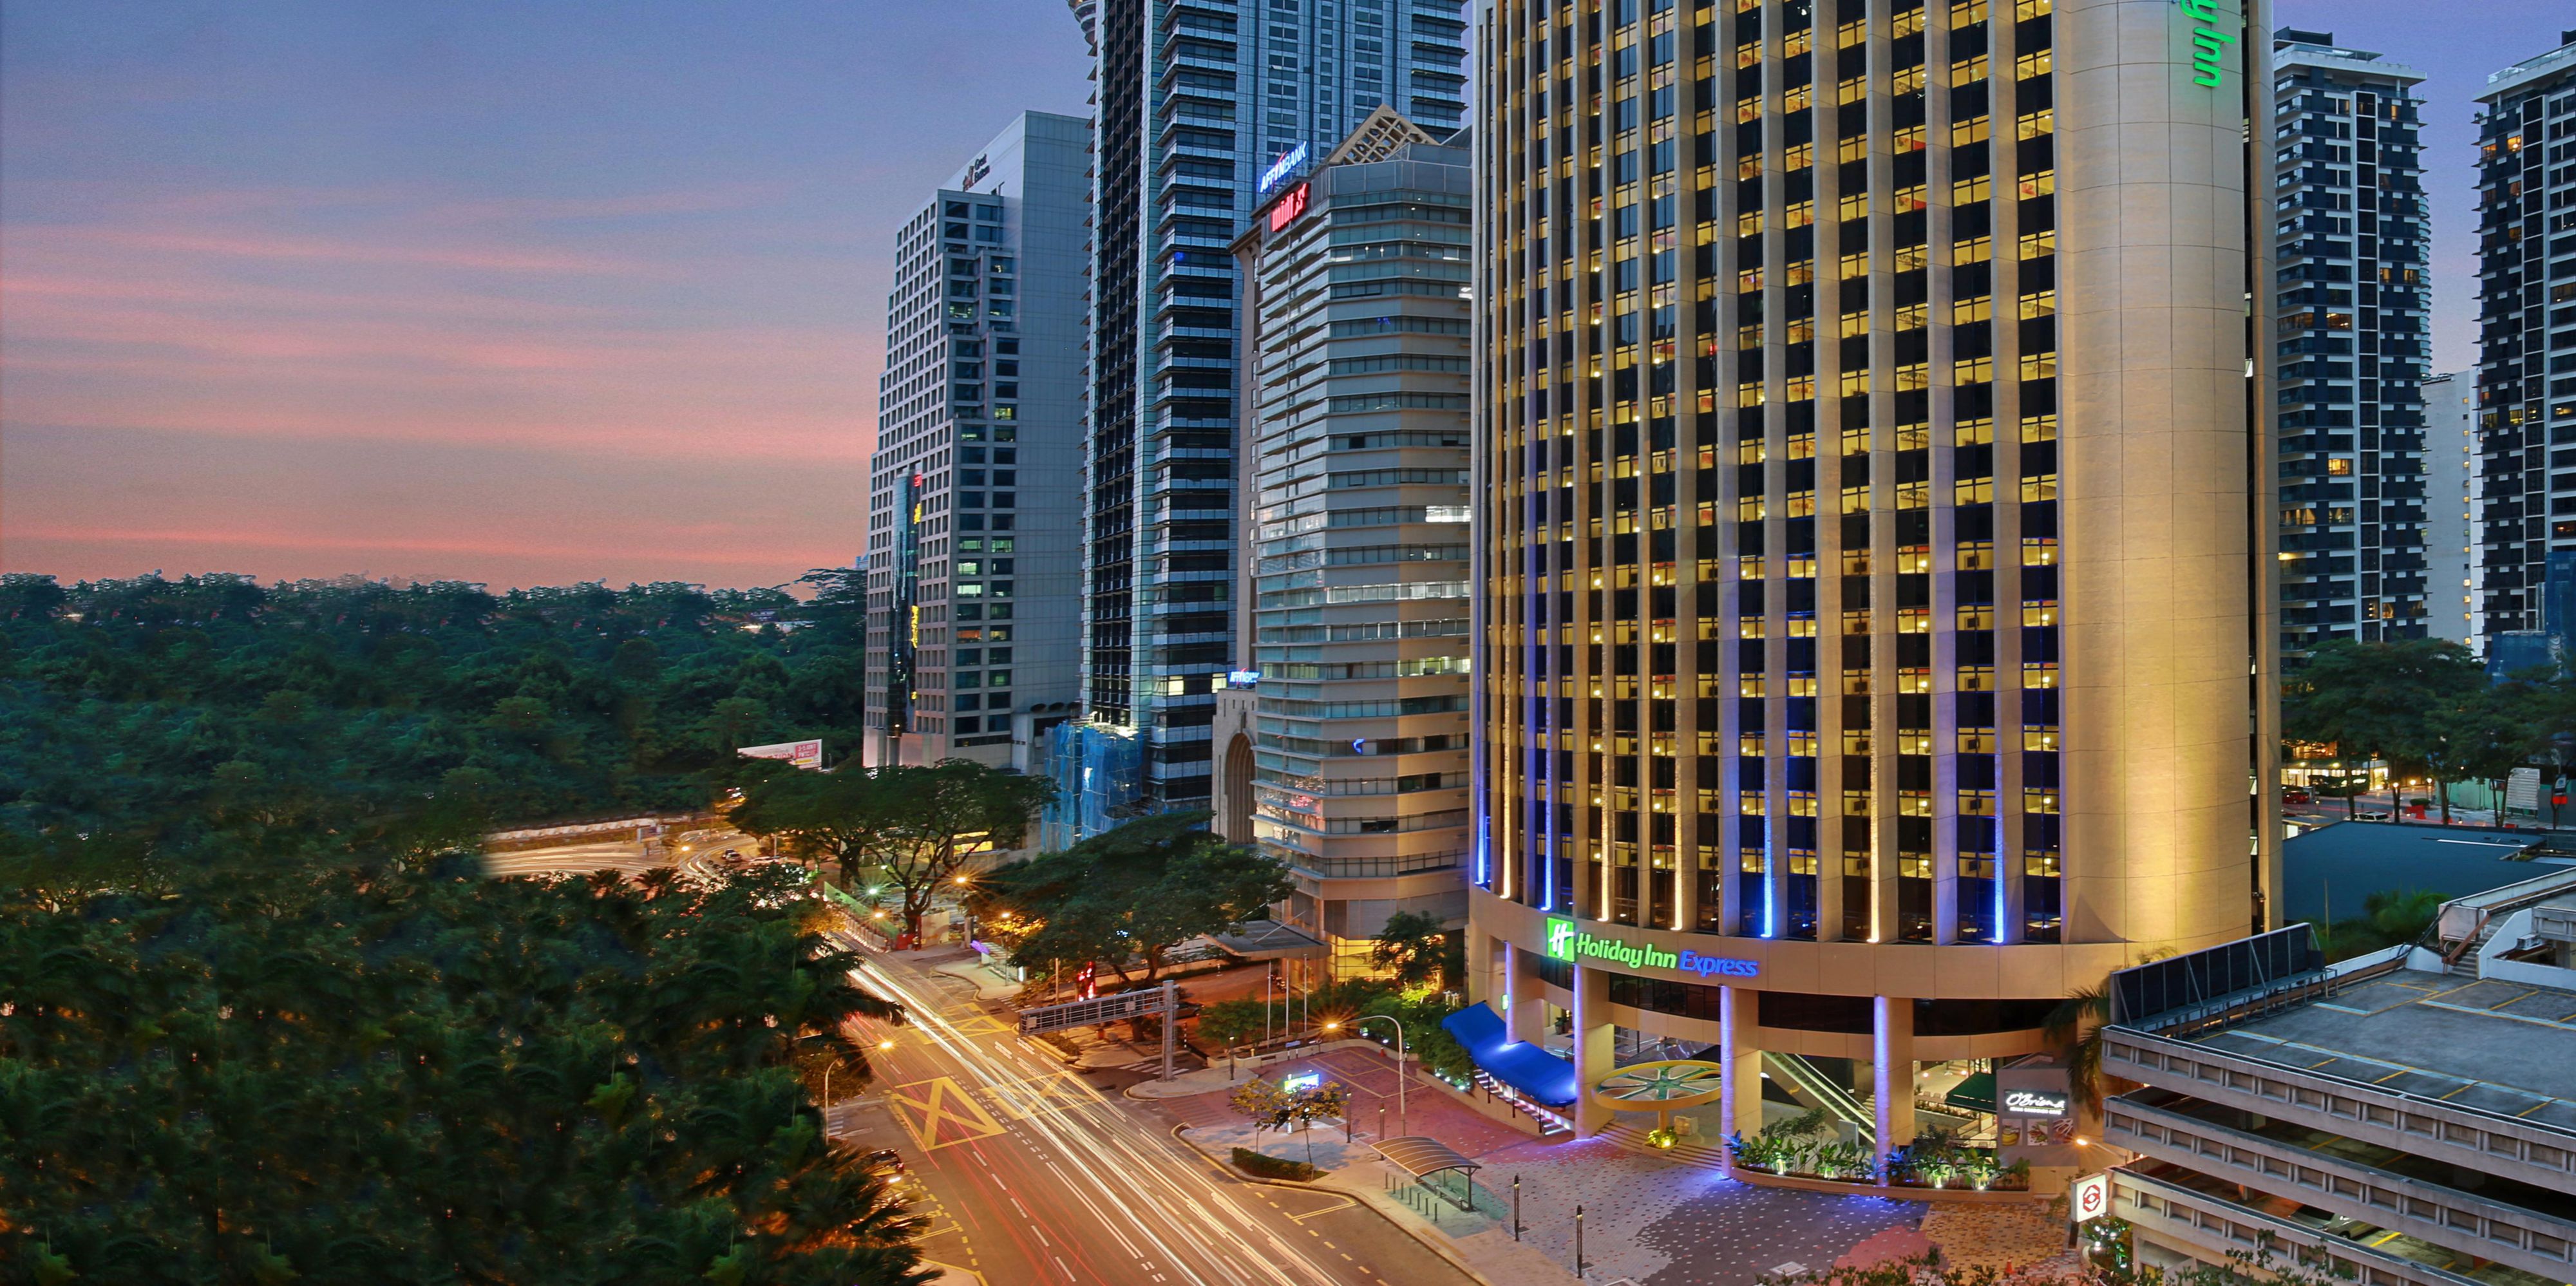 A 3-minute walk to the Raja Chulan Monorail Station gives you easy access to the attraction areas in Kuala Lumpur such as the shopping paradise Bukit Bintang, world-renowned Petronas Twin Towers, and more. It also connects to other public transport which leads you to every corner of Kuala Lumpur.